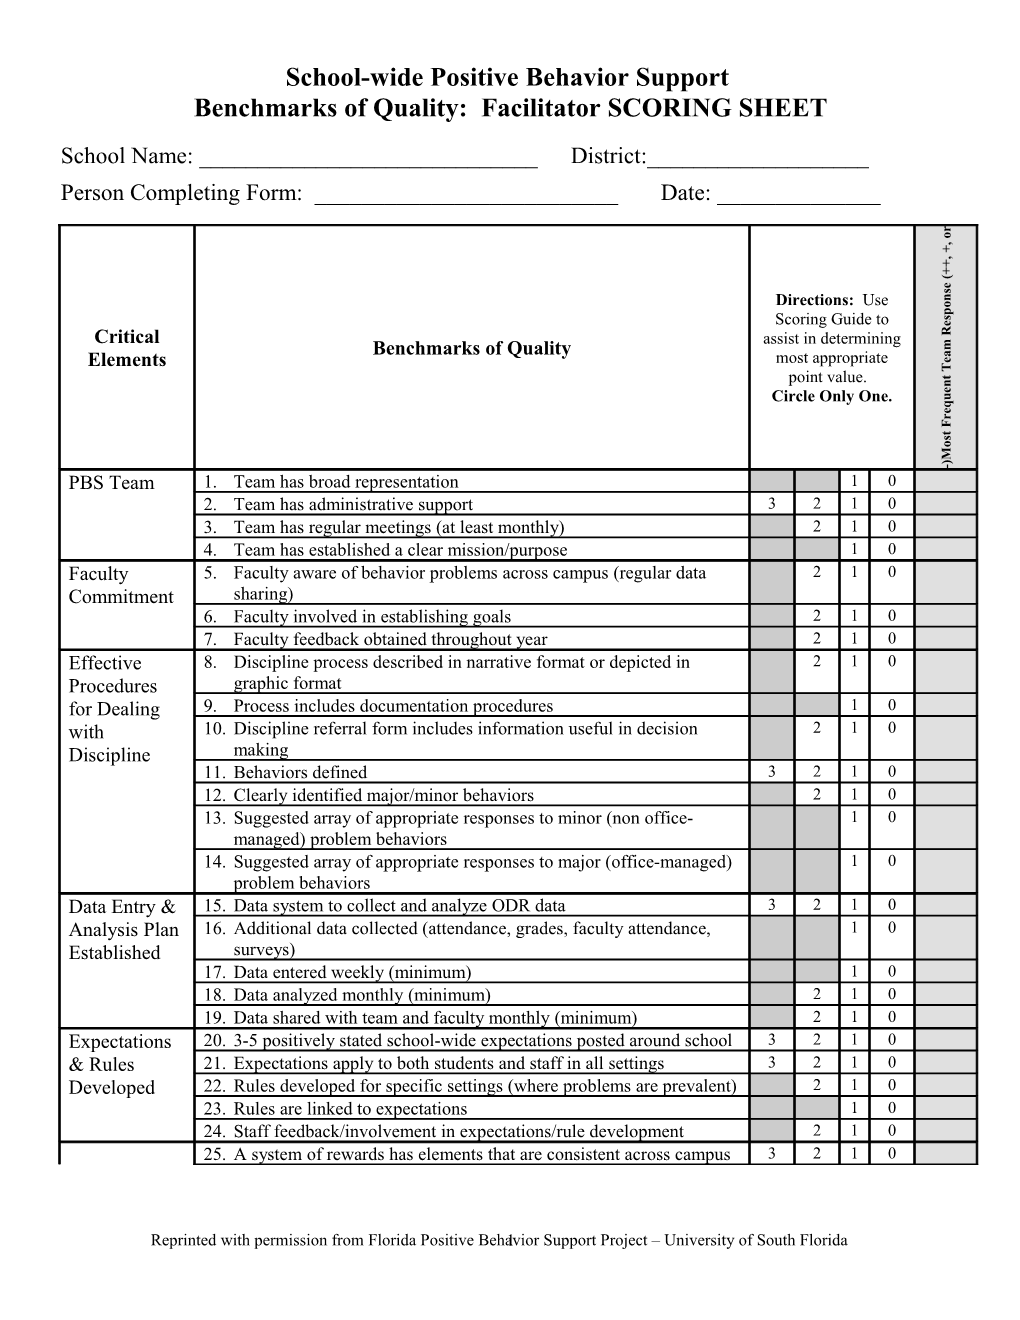 School-Wide Benchmarks of Quality: SCORING SHEET